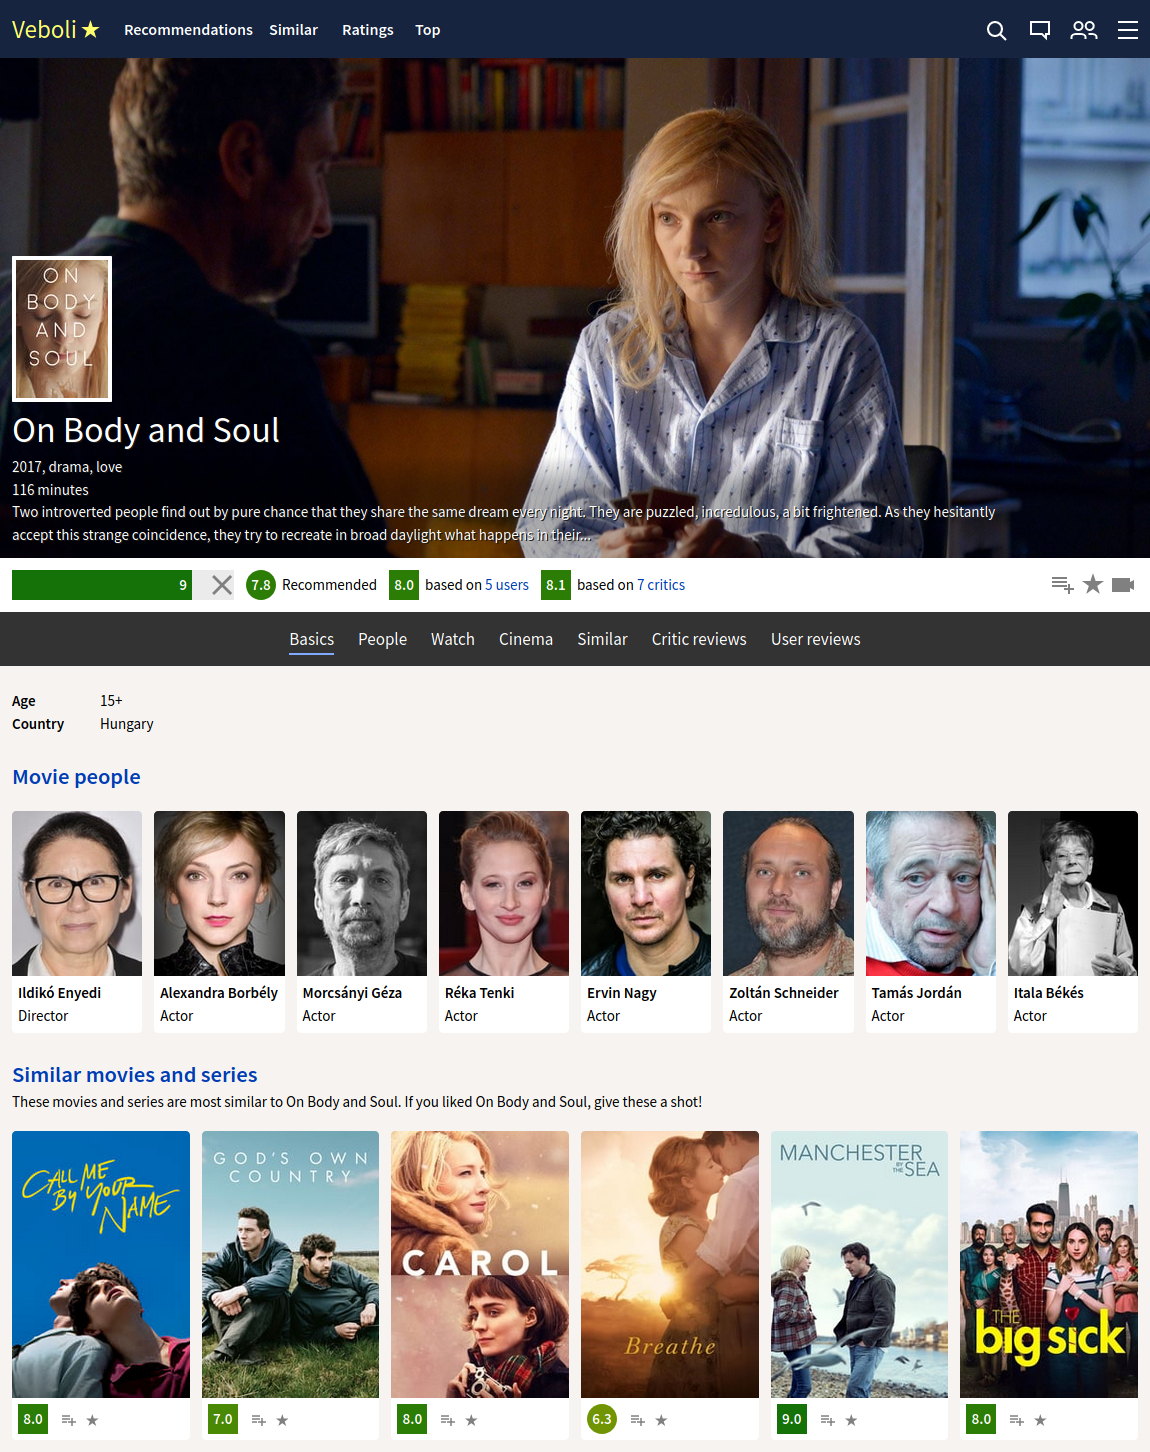 Image of the movie page for On Body and Soul.